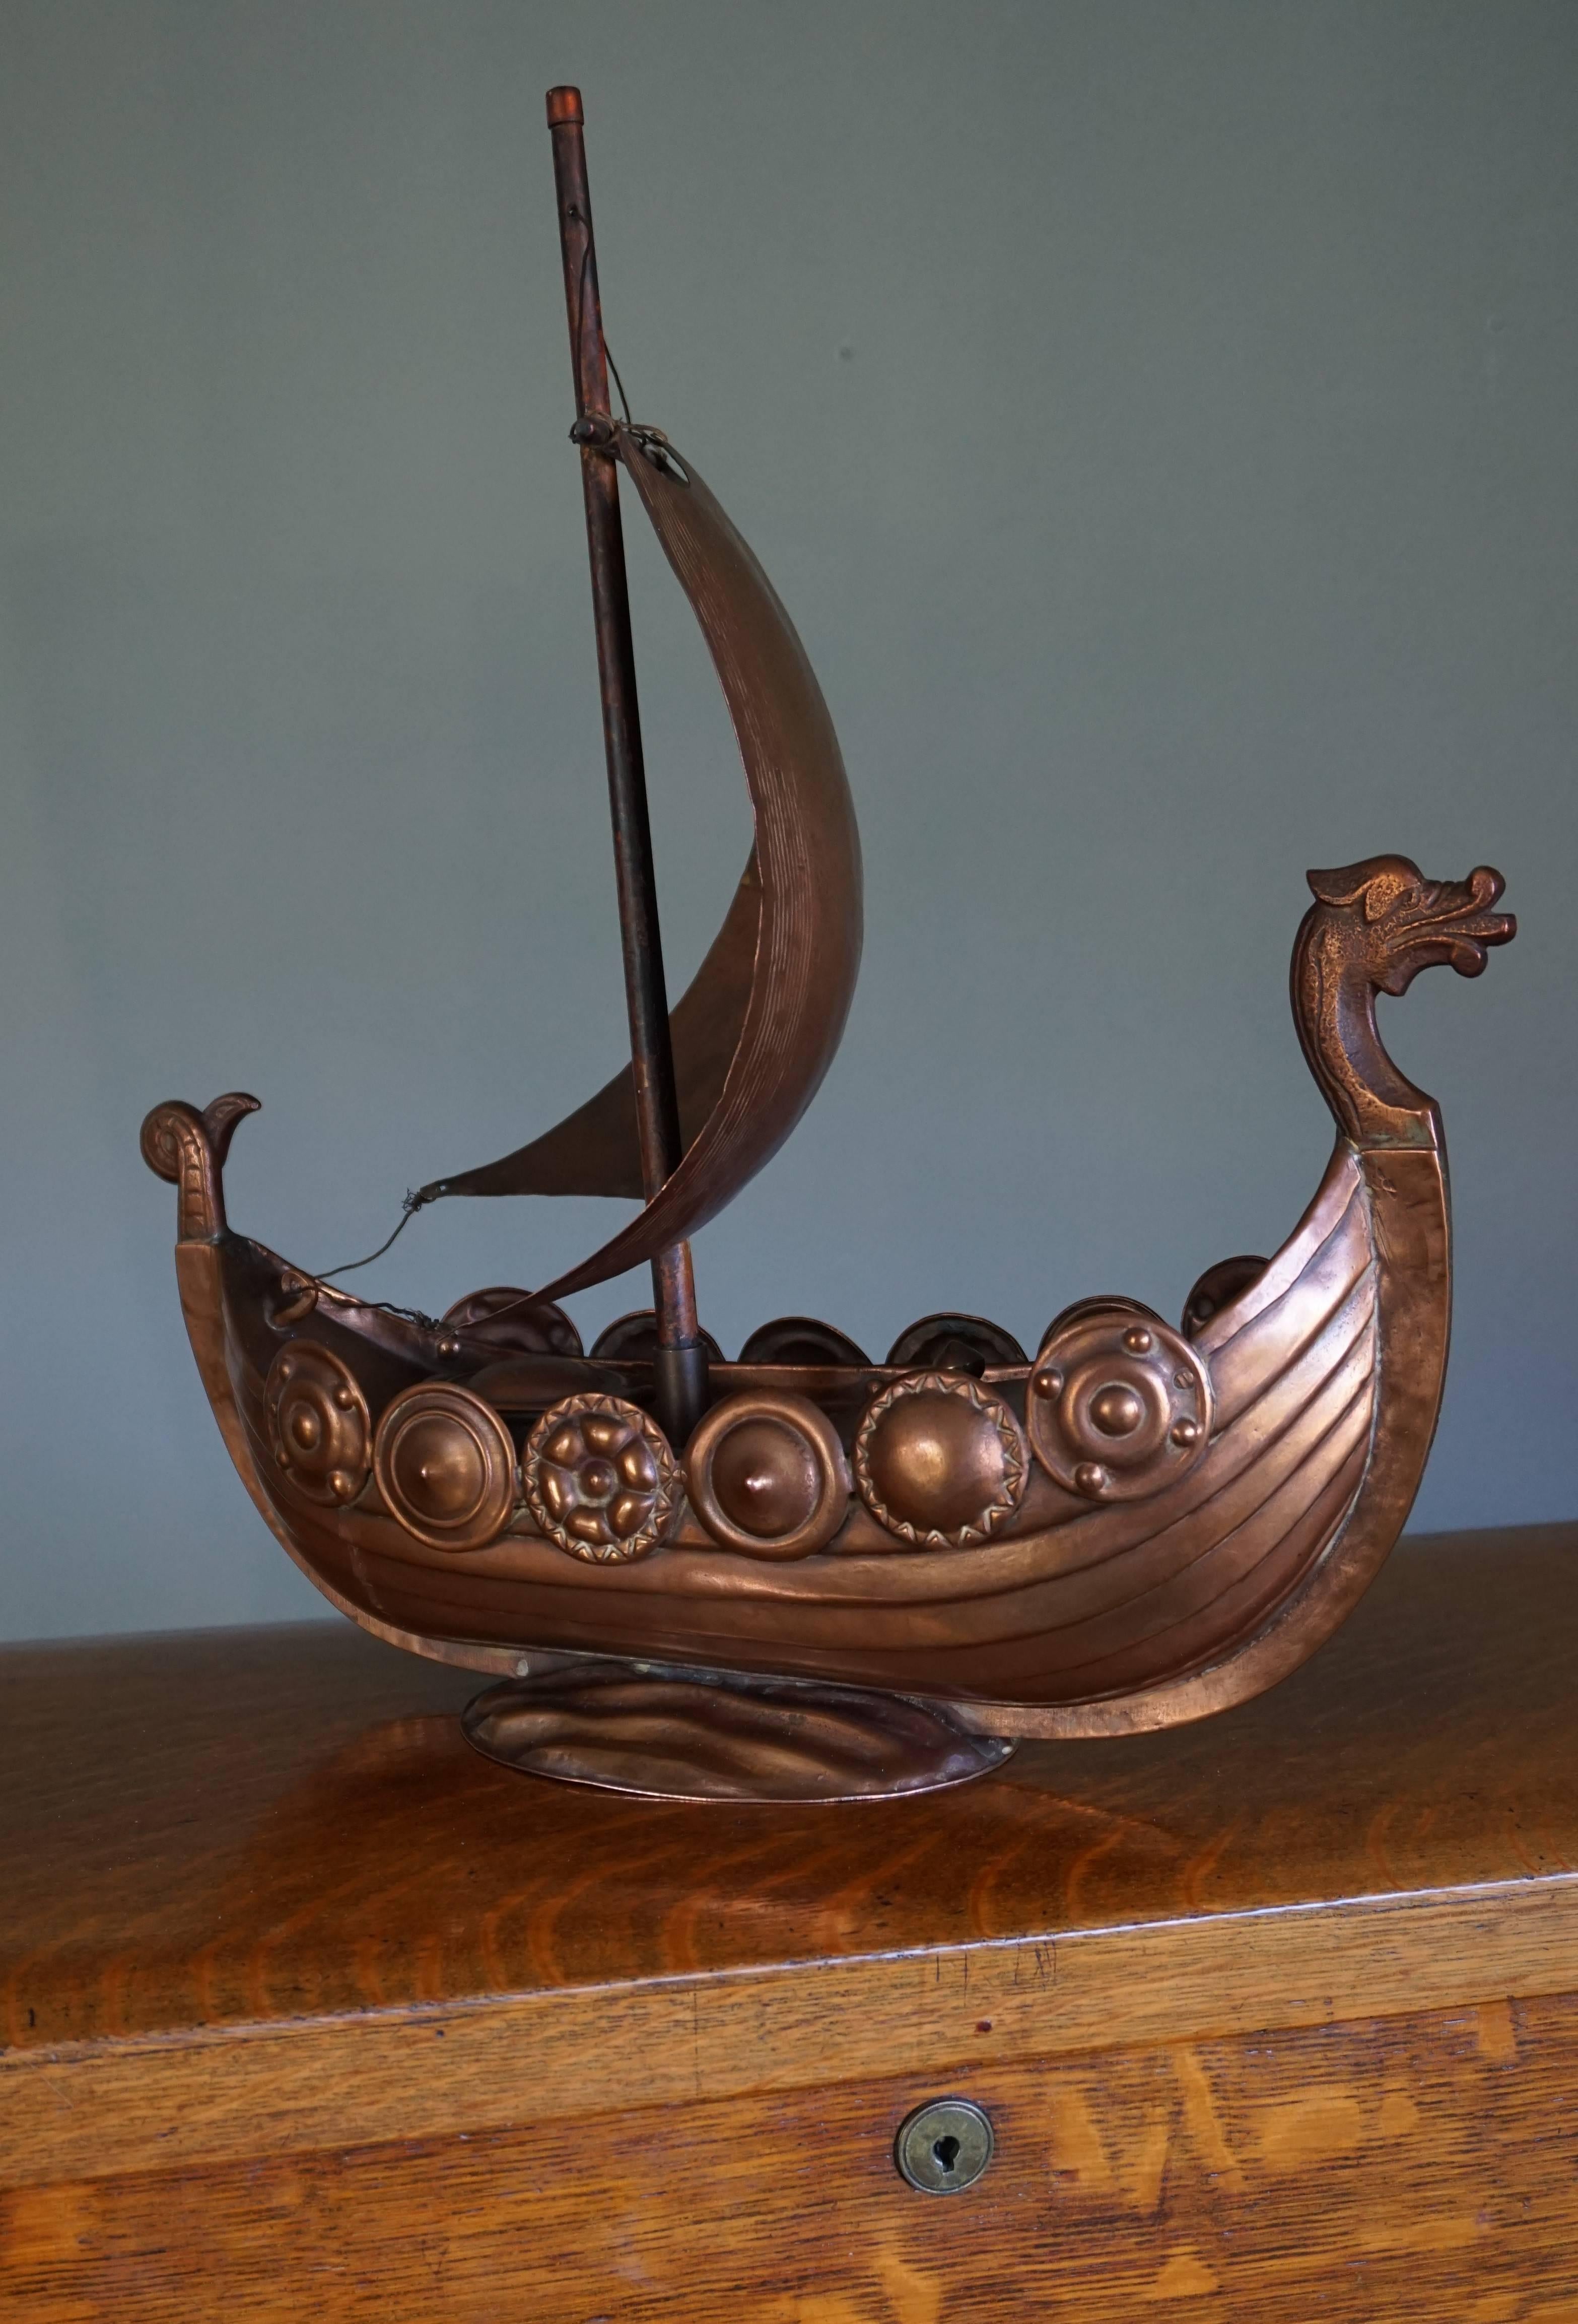 20th Century Unique Folk Art Copper Viking Ship Table Piece with Shields and Boxes on Deck For Sale